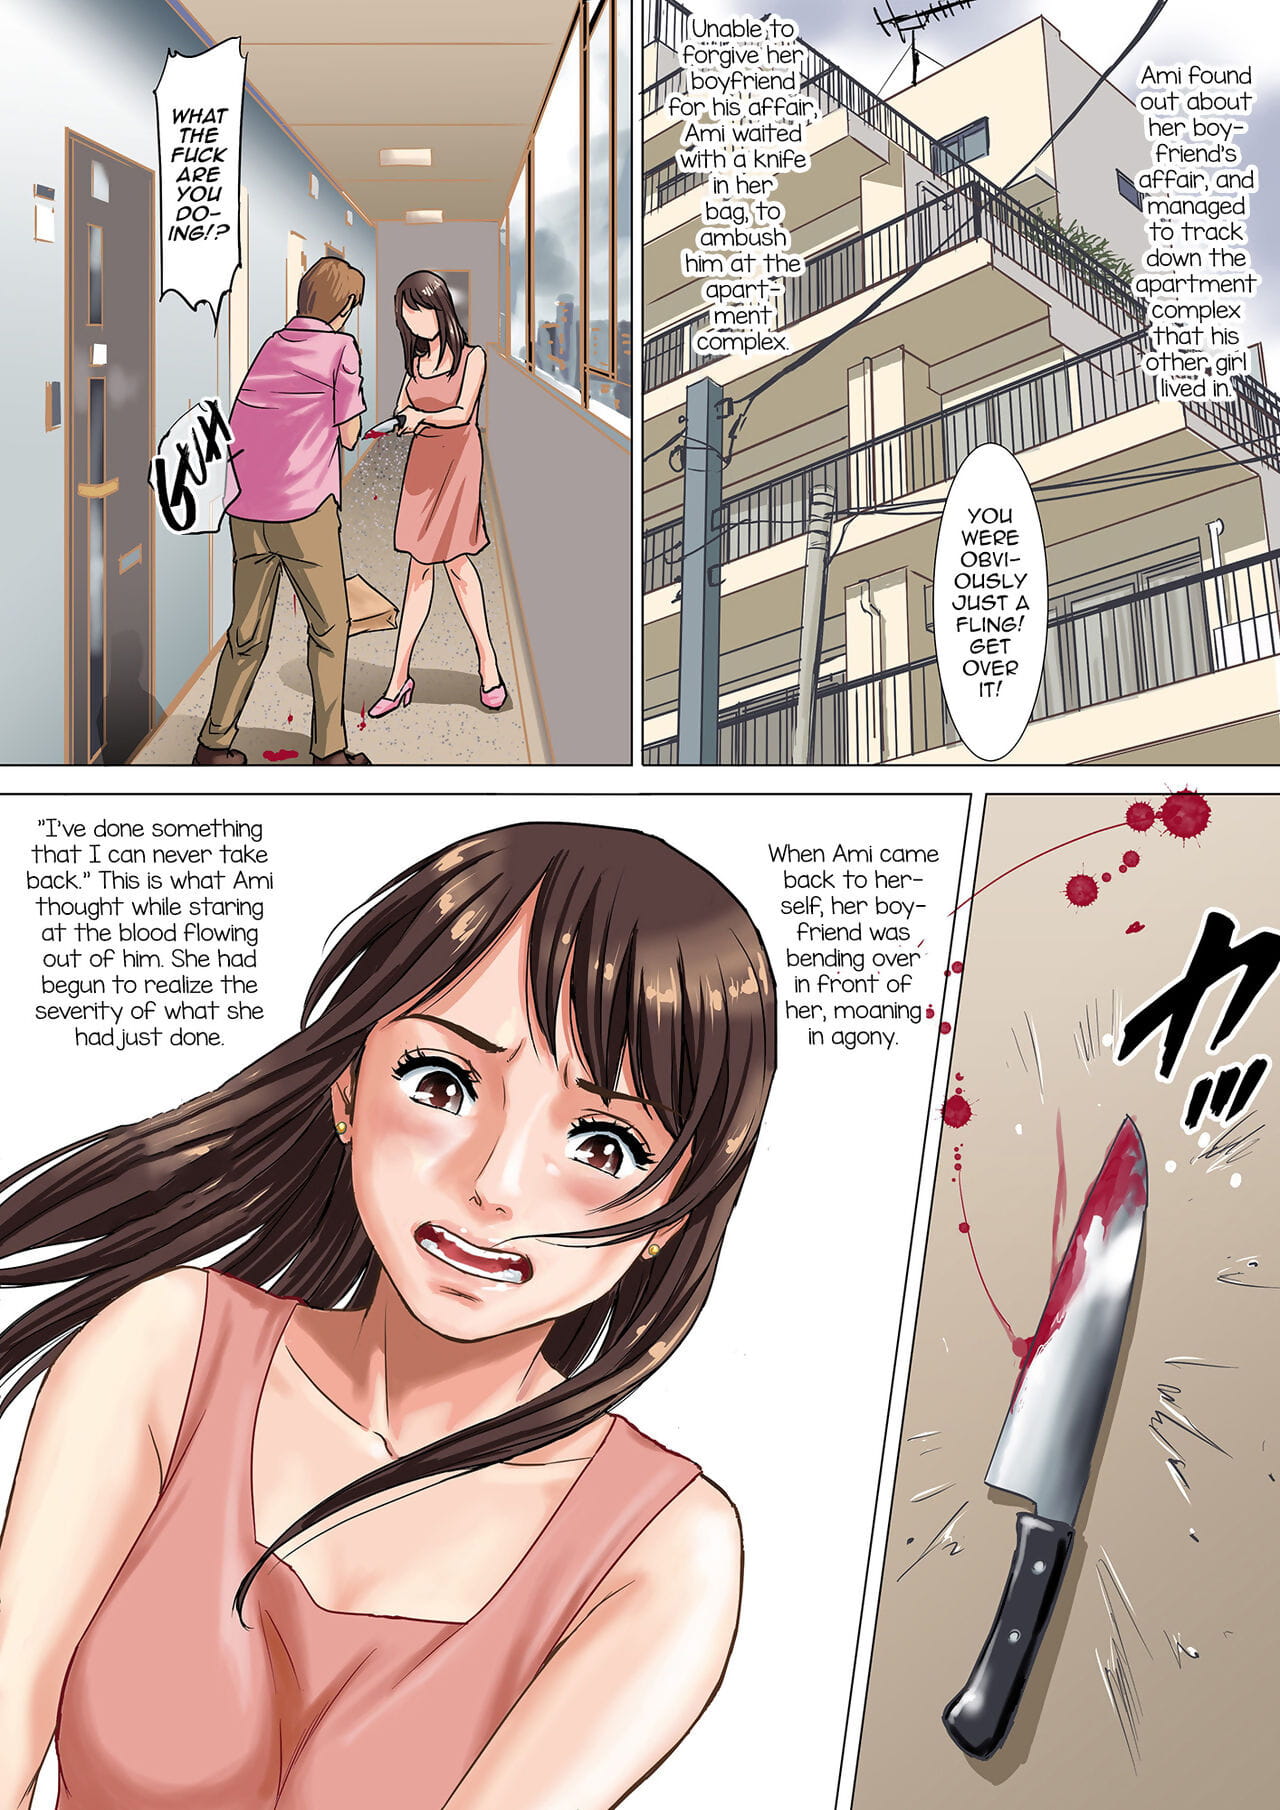 newhalf 囚人 page 1